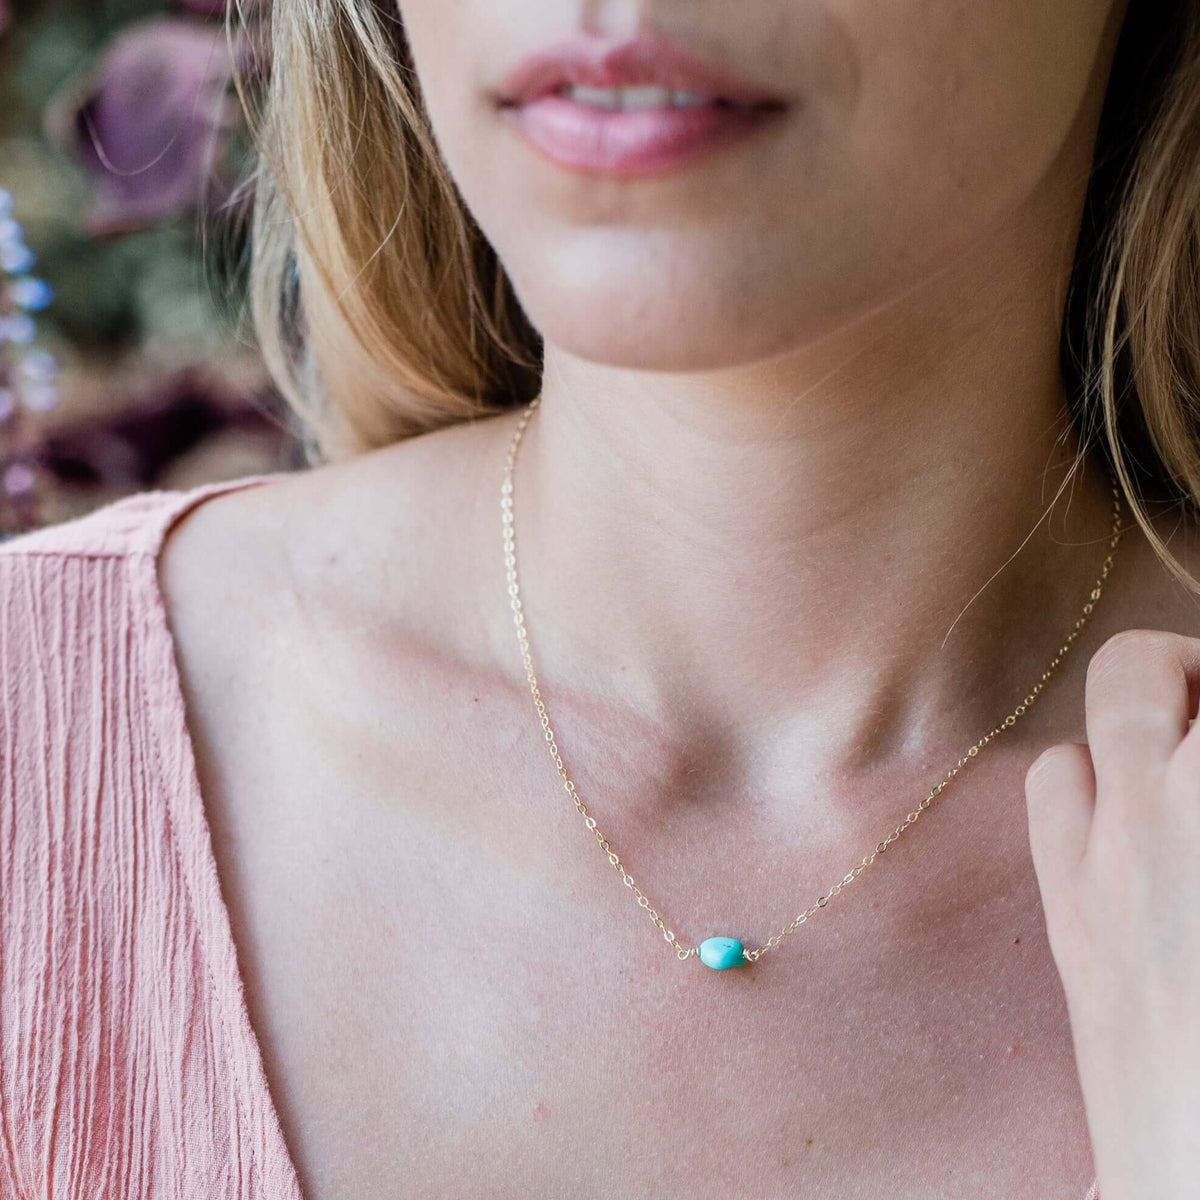 Raw Nugget Necklace - Turquoise - 14K Gold Fill - Luna Tide Handmade Jewellery